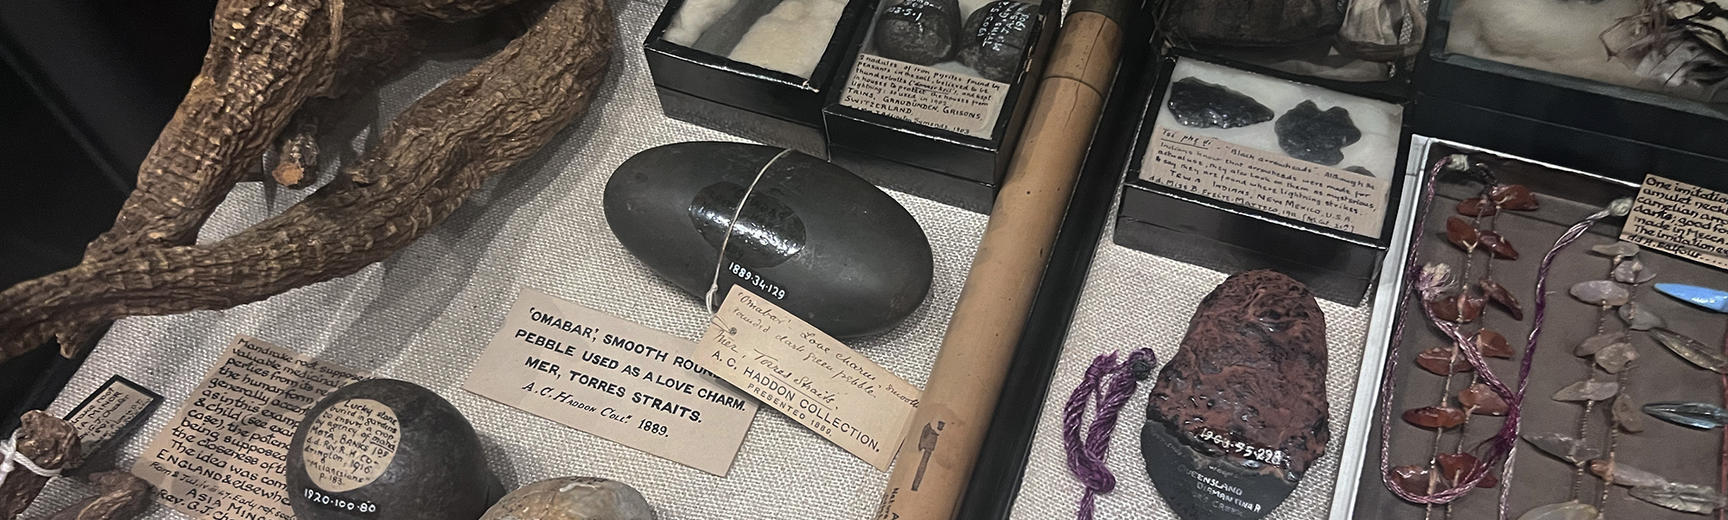 View of a display case containing stones and sticks